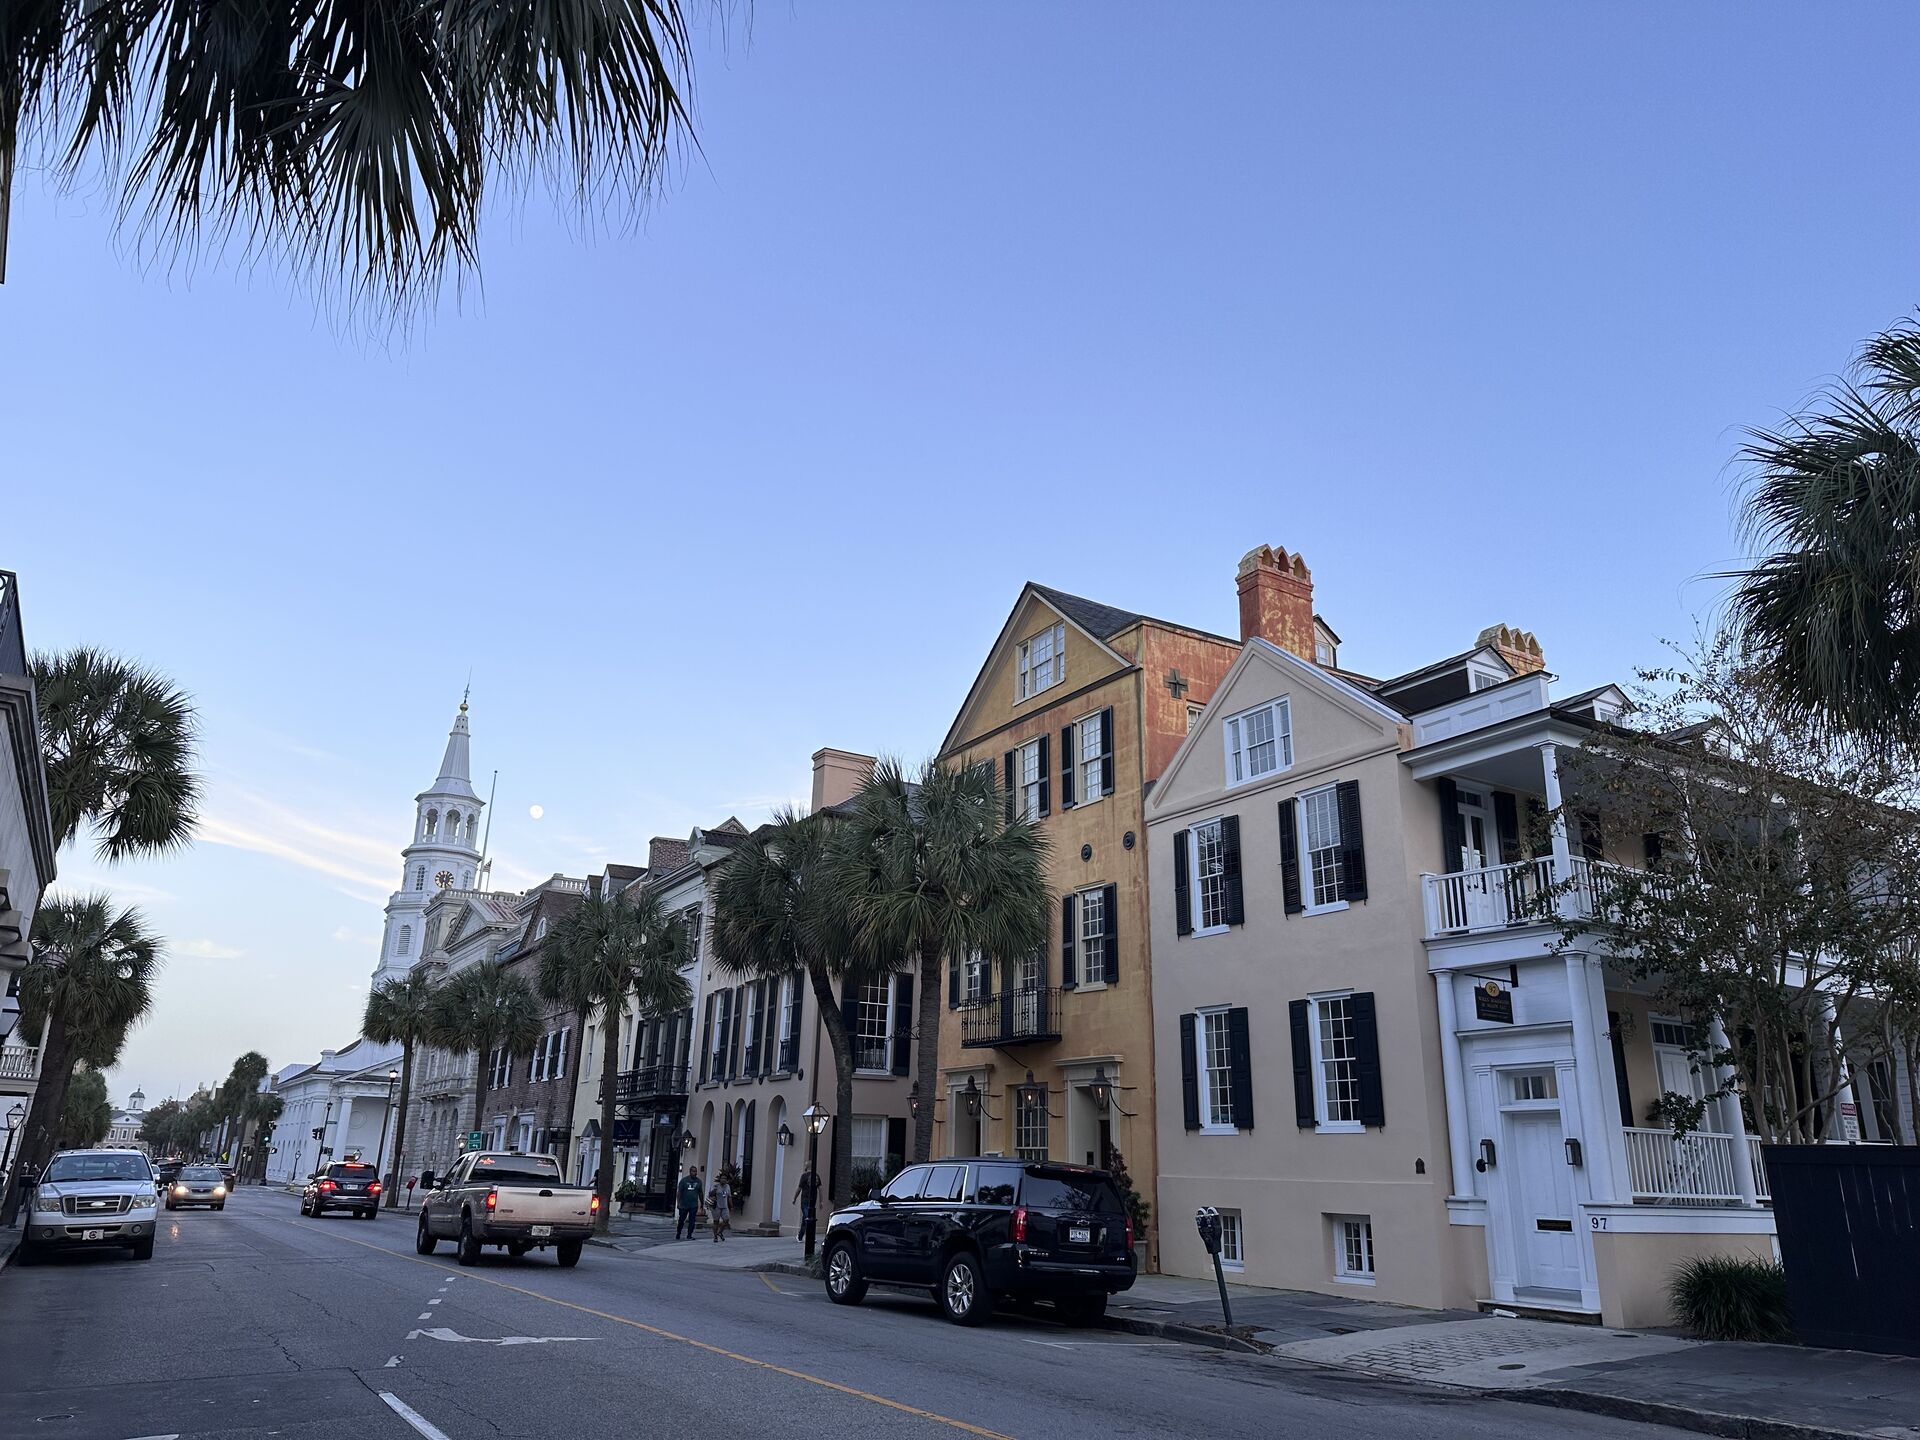 Charleston has a rich and complicated history